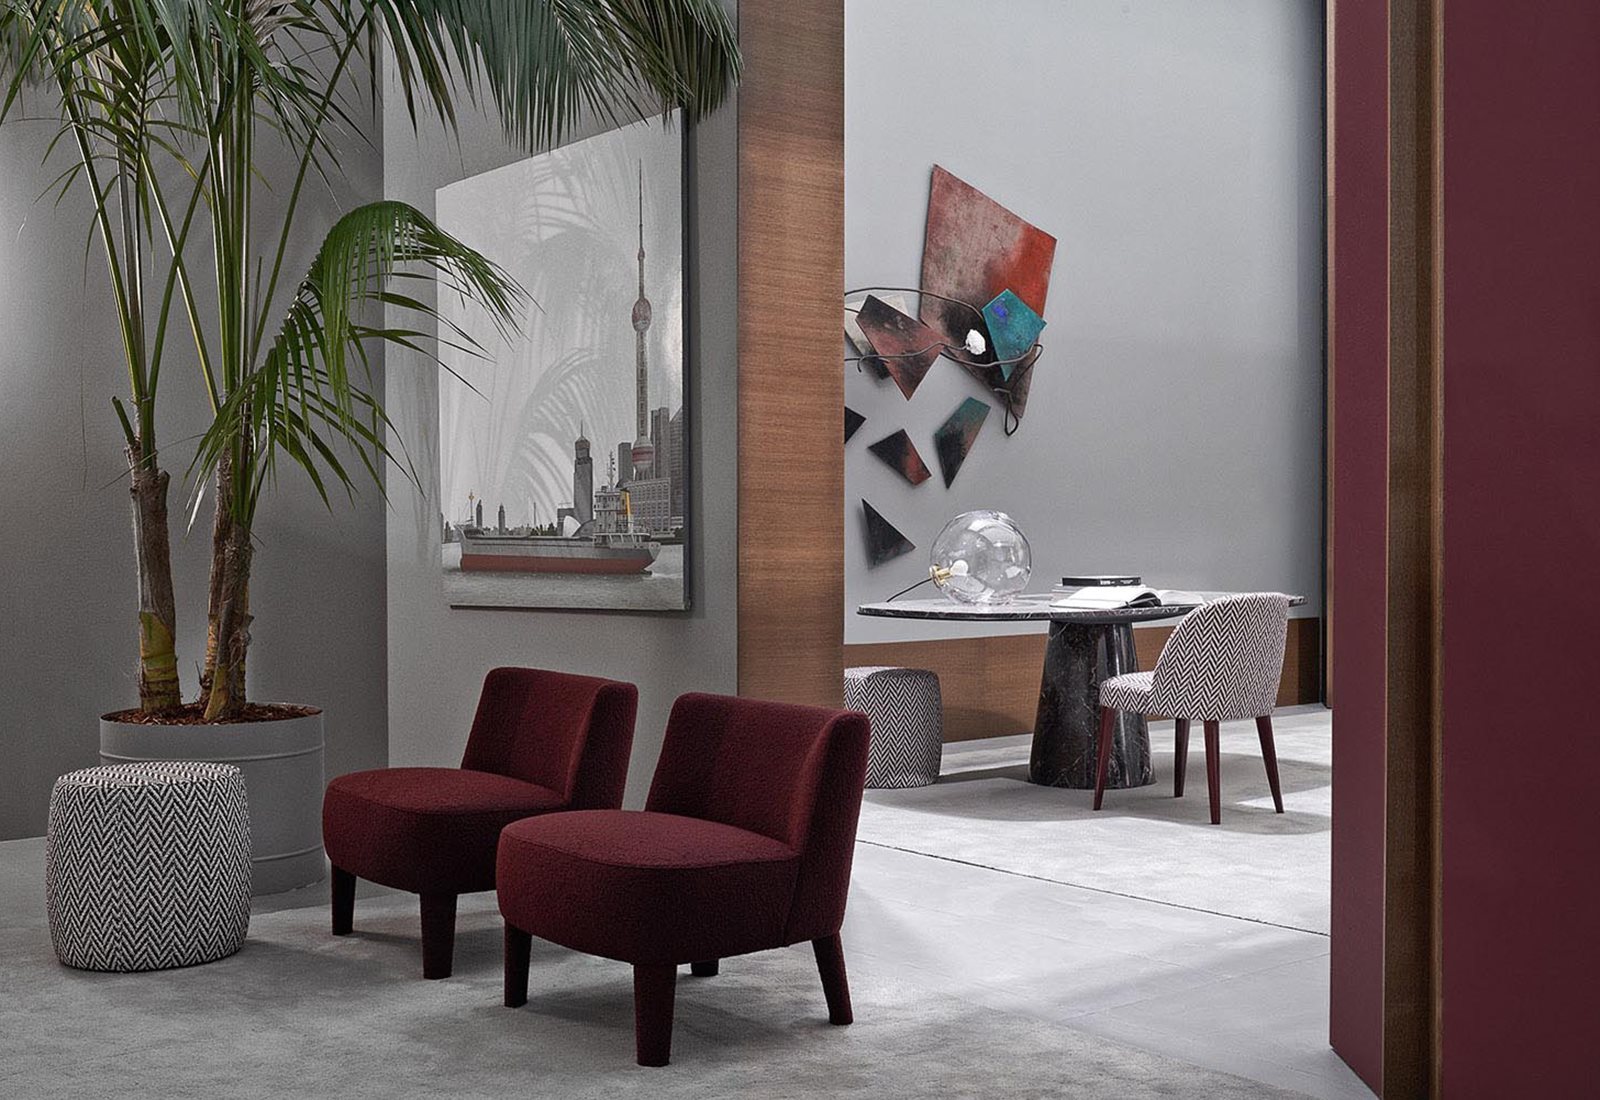 11---Meridiani---salone-2019---isabelle-small-armchair---owen-dining-table---odette-uno-chair-1600x1100